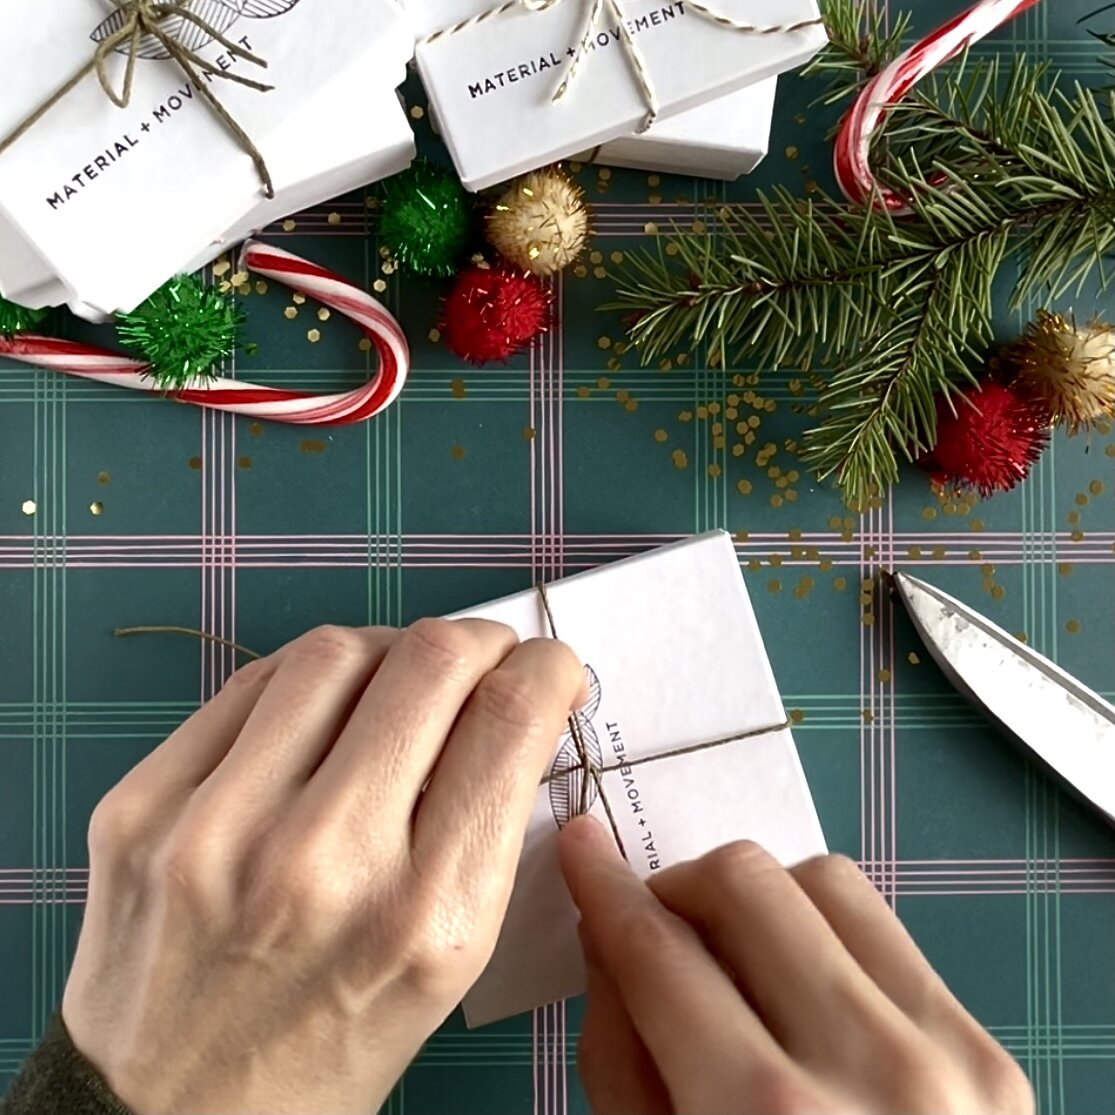 The Fastest Way to Tie a Perfect Bow on Your Gifts — Material+